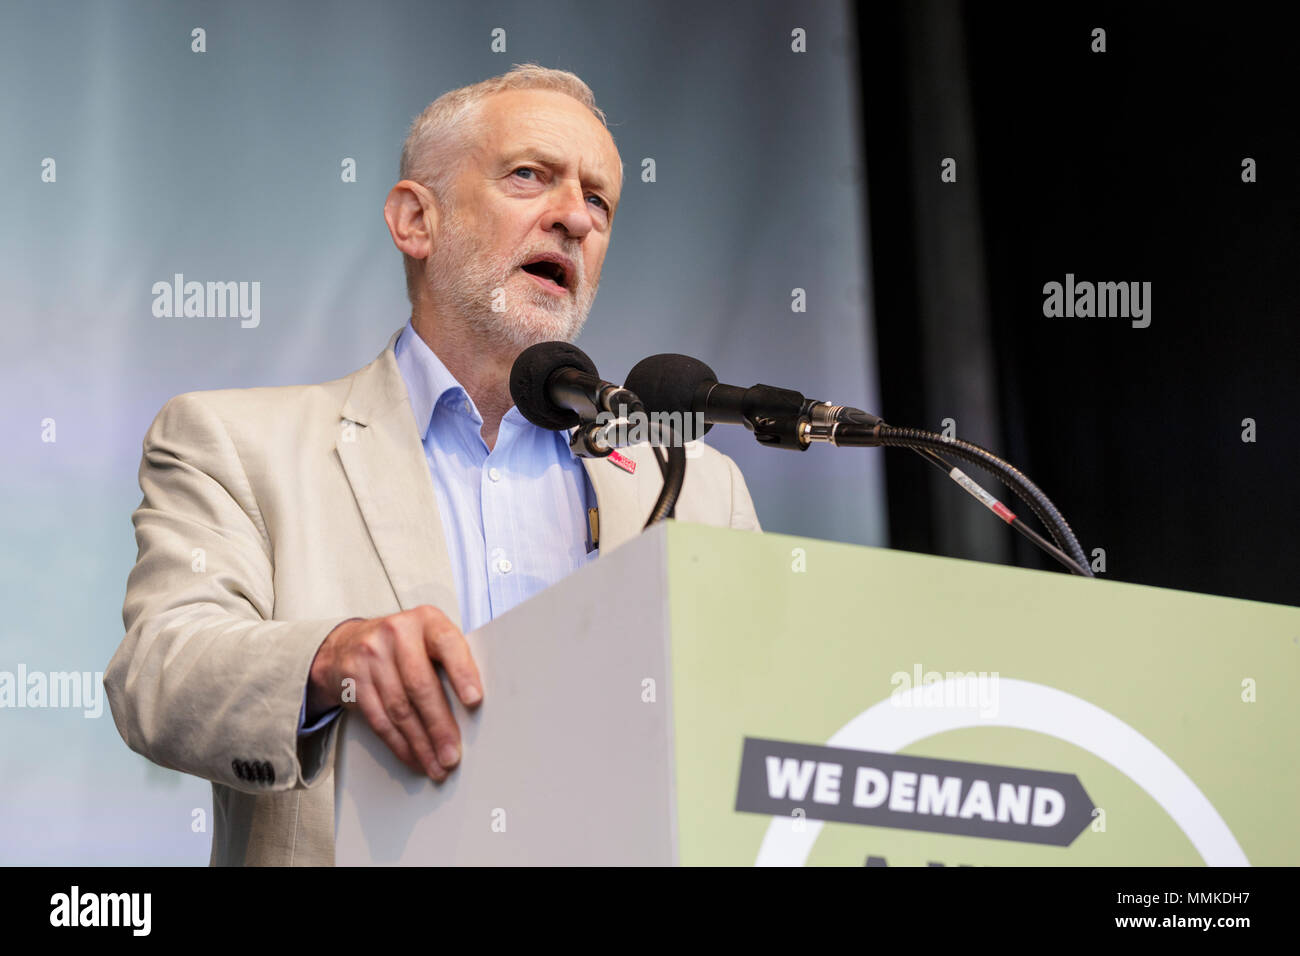 Westminster, London, 12th May 2018. Labour Party leader Jeremy Corbyn speaks at the rally in Hyde Park. The TUC march processes through central London from Victoria Embankment to Hyde Park for a rally. The march has the theme ' a new deal for working people', aimed against government austerity and injustice. Credit: Imageplotter News and Sports/Alamy Live News Stock Photo